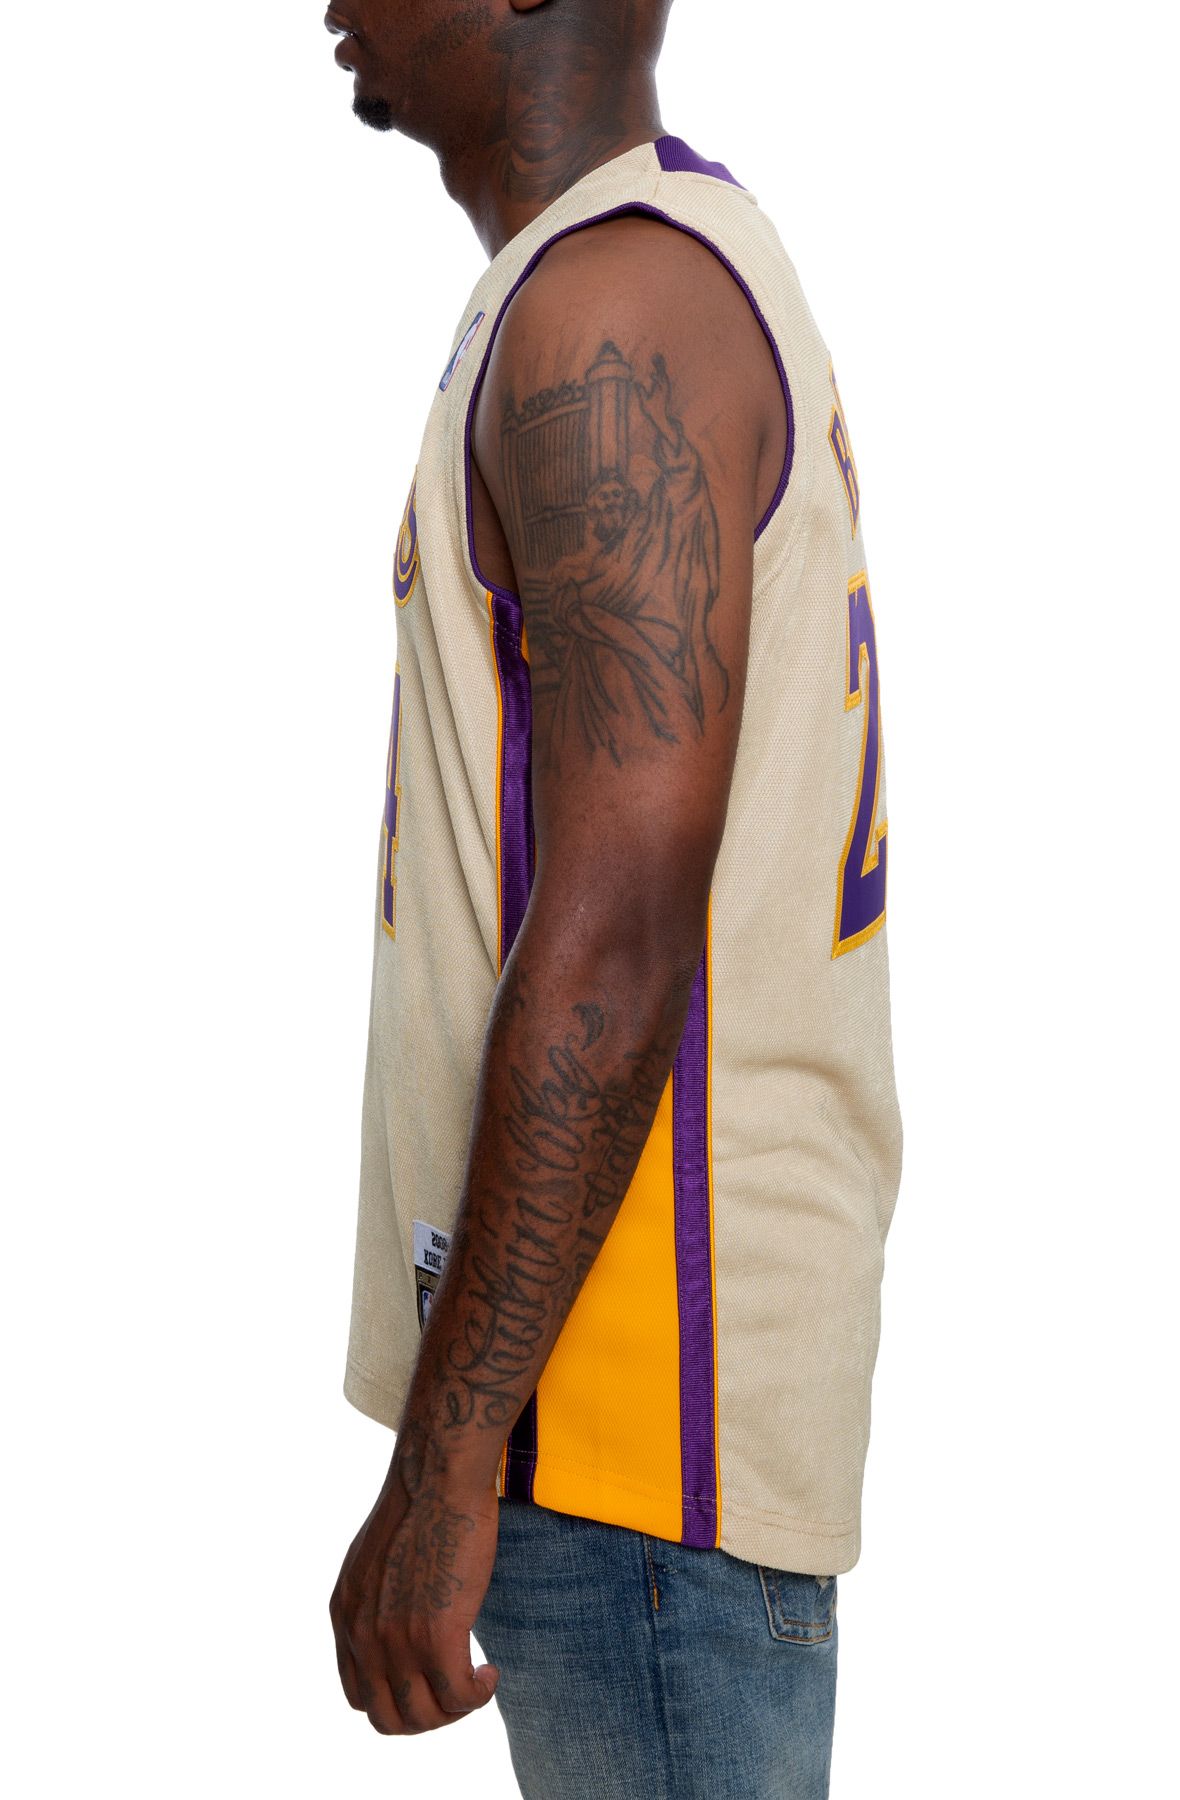 Mitchell & Ness Kobe Bryant Los Angels Lakers Reversible Jersey - SoleFly